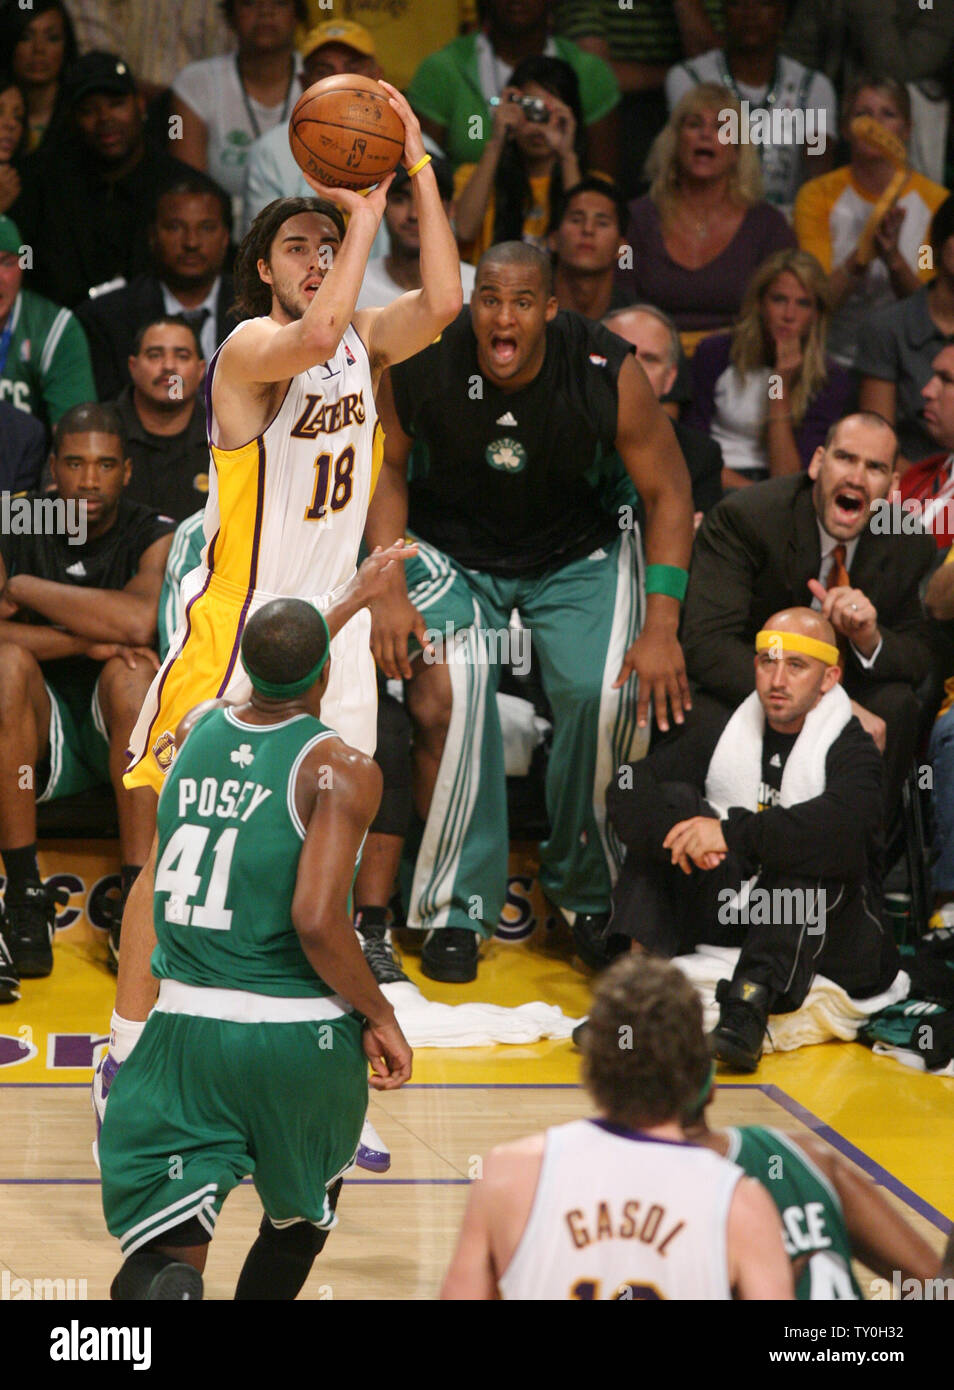 Los Angeles Lakers' Sasha Vujacic shoots a three-pointer over Boston Celtics' James Posey in Game 5 of the NBA finals at Staples Center in Los Angeles on June 15, 2008. The Lakers defeated the Celtics 103-98 to stave off elimination in the best-of-seven series. The Celtics lead the series 3-2.  (UPI Photo/Lazlo Fitz) Stock Photo